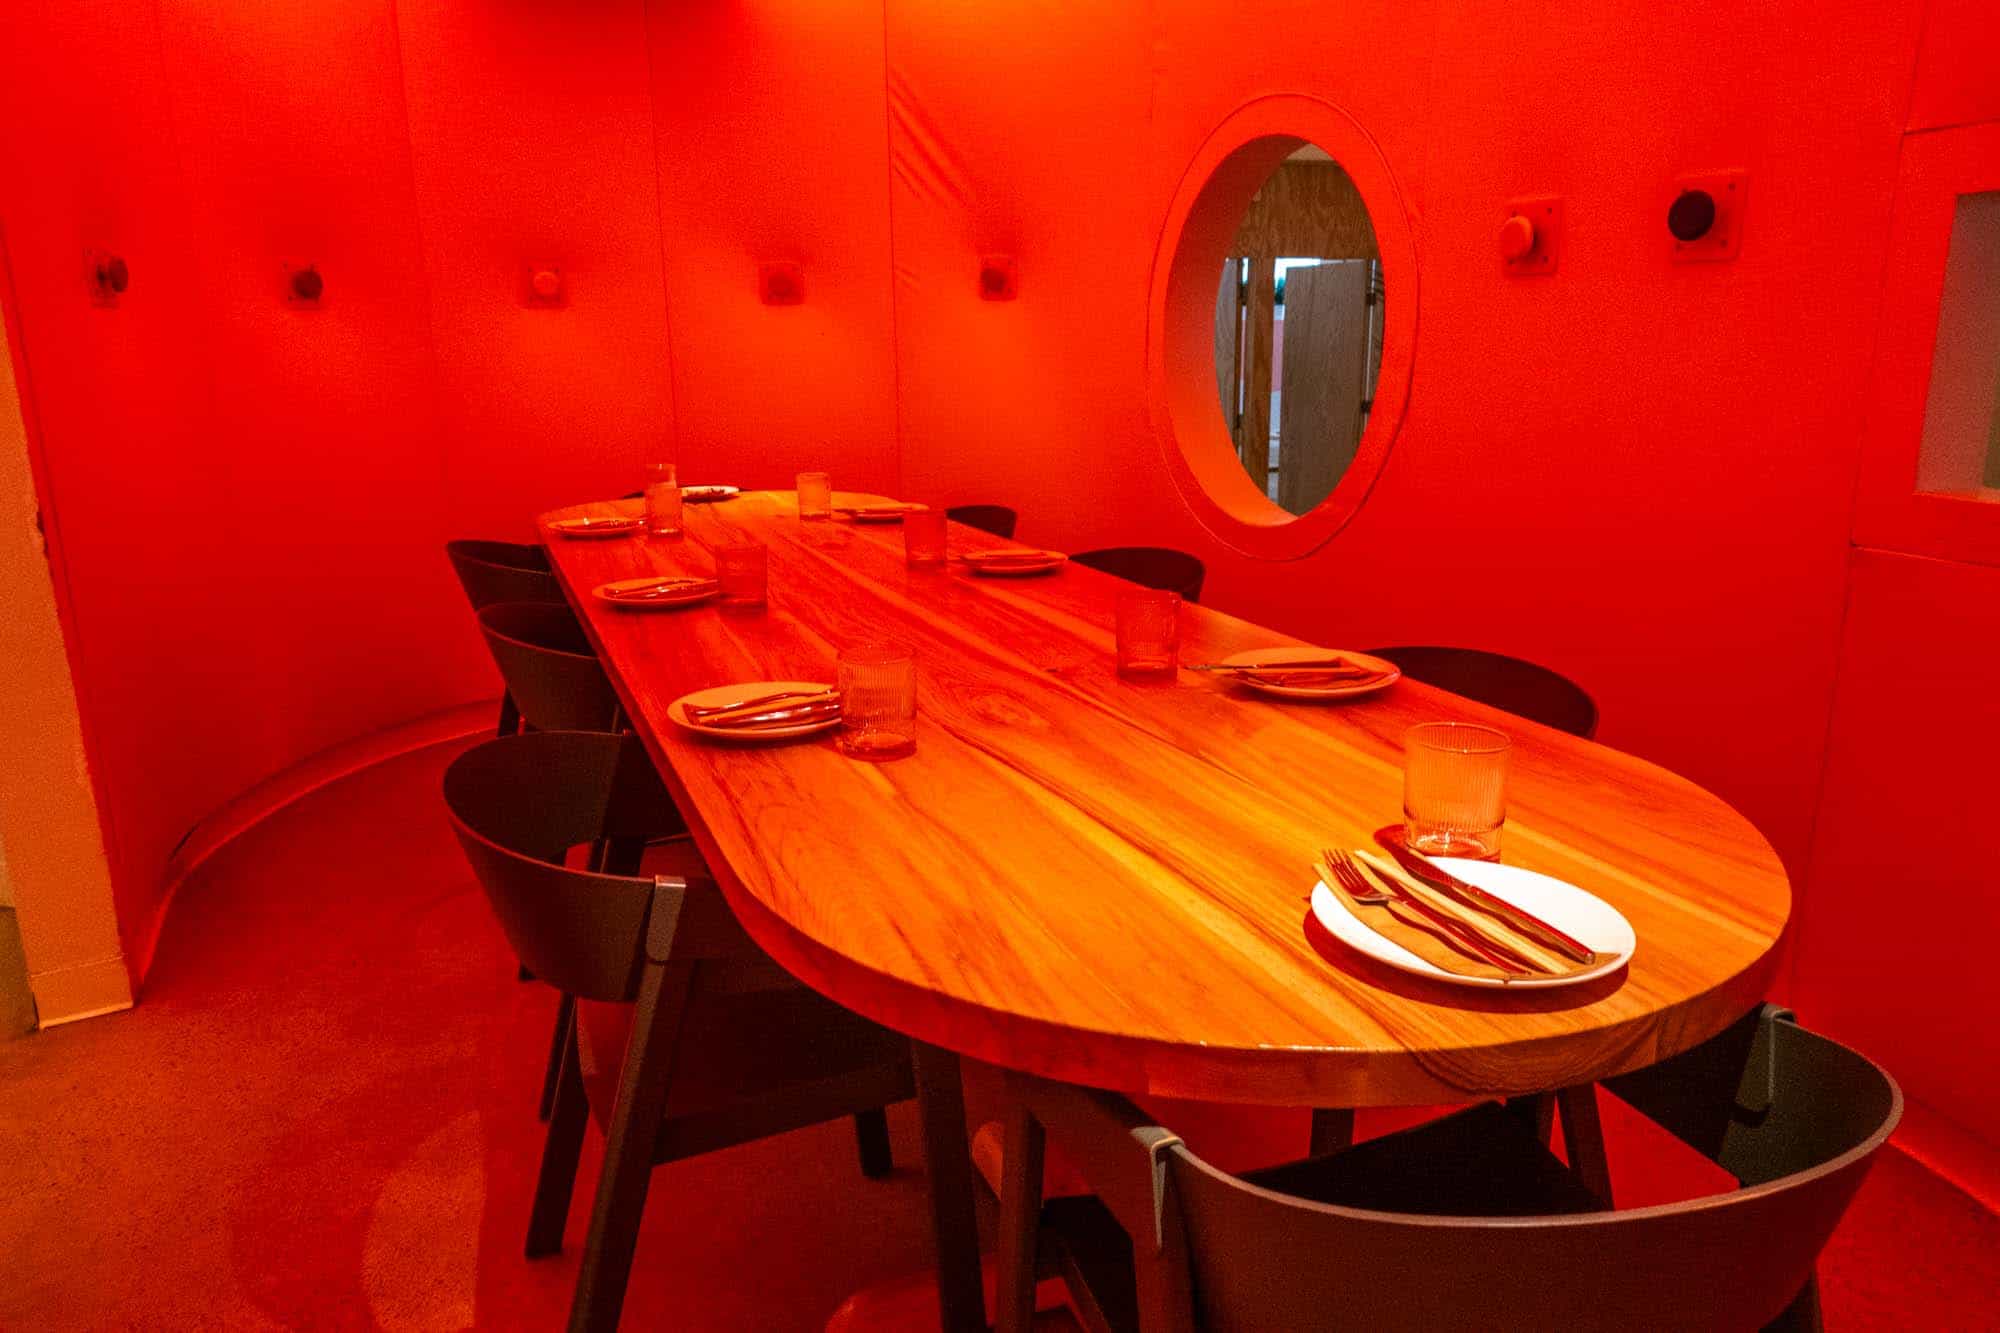 Private dining pod with red lighting